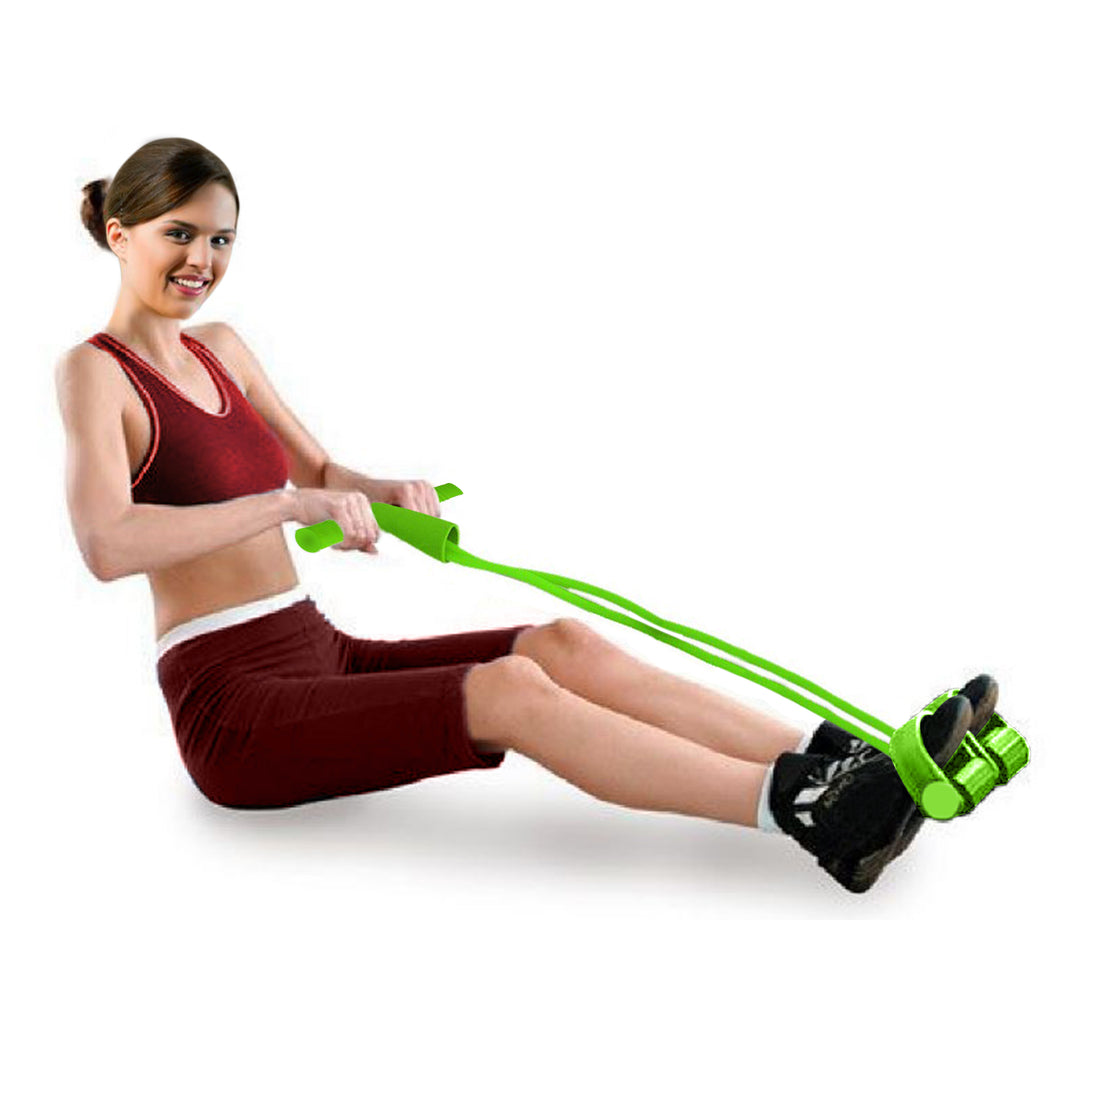 Resistance Band Abdominal Trainer - Blue, Green, Pink or Purple